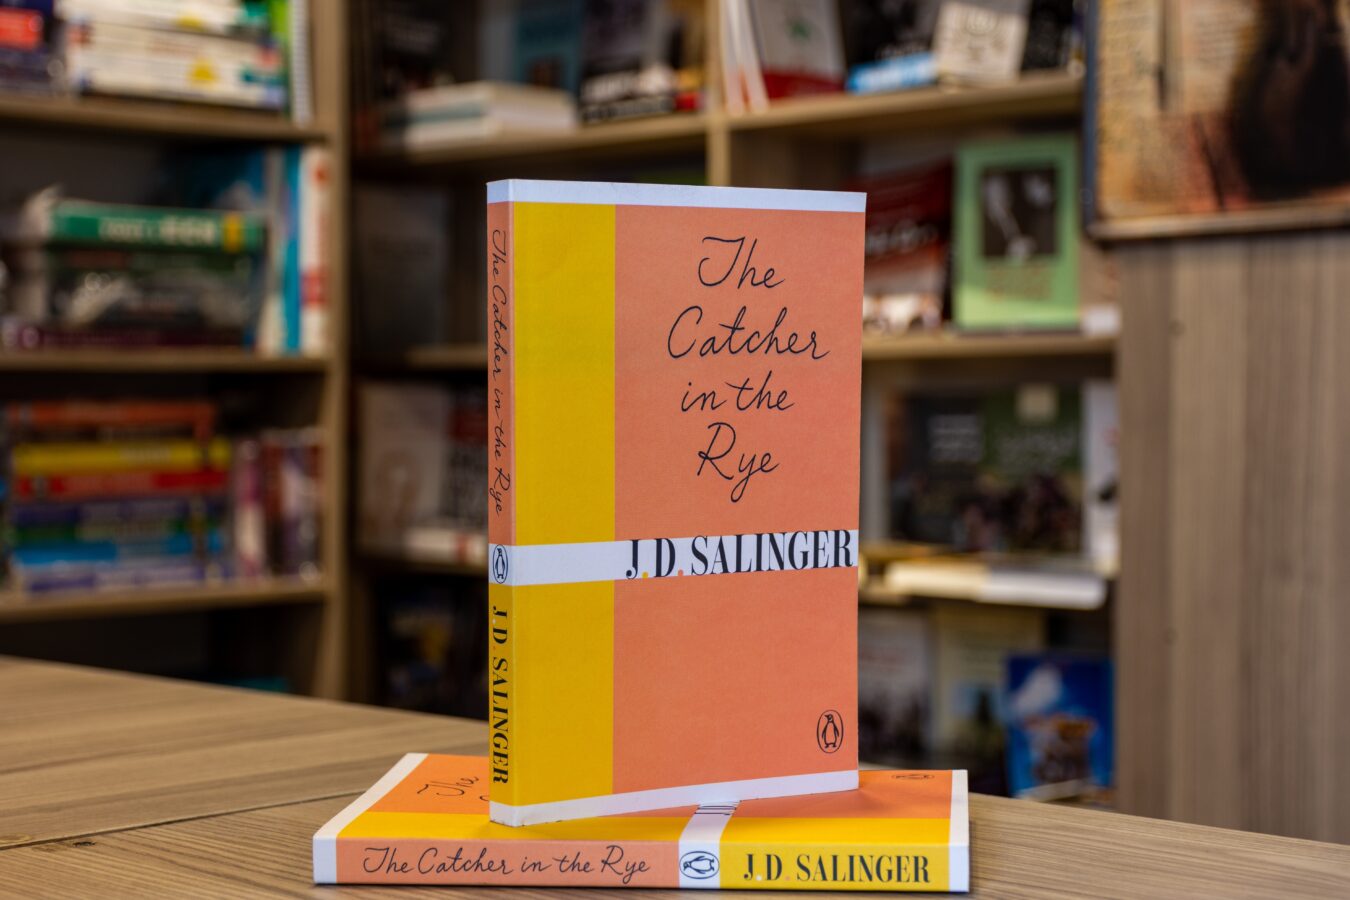 <p><span>J.D. Salinger’s experiences as a teenager in 1930s and 1940s New York City inspired the character of Holden Caulfield in The Catcher in the Rye.</span></p>